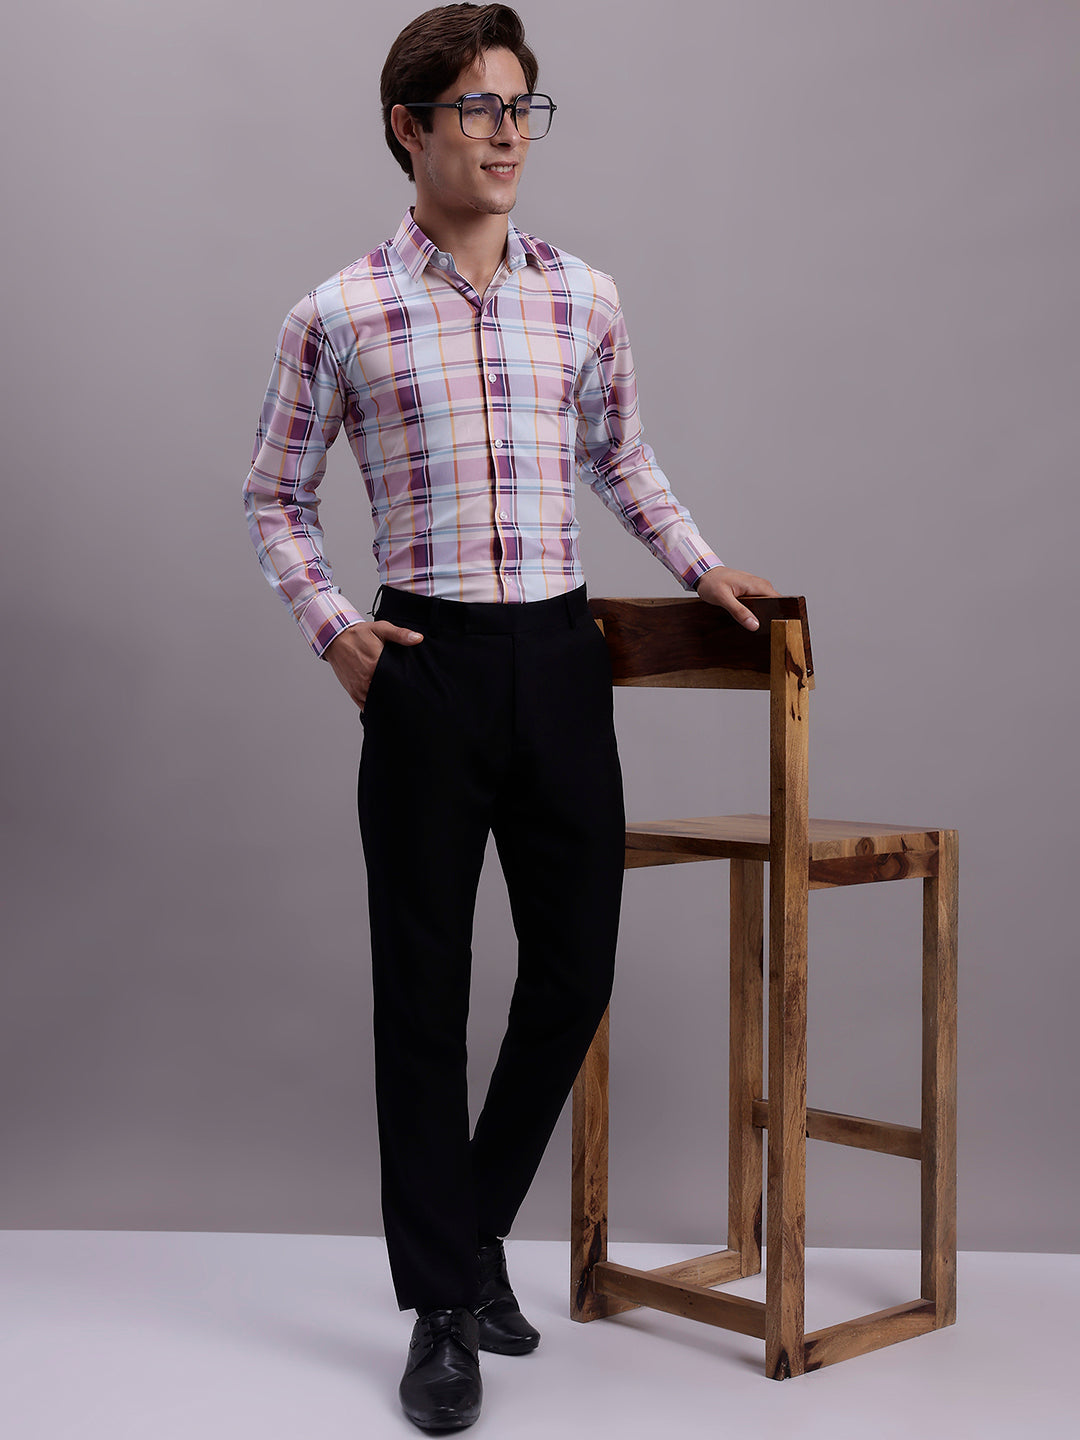 Men's Cotton Blend Checked Formal Shirt ( SF 888 Wine )